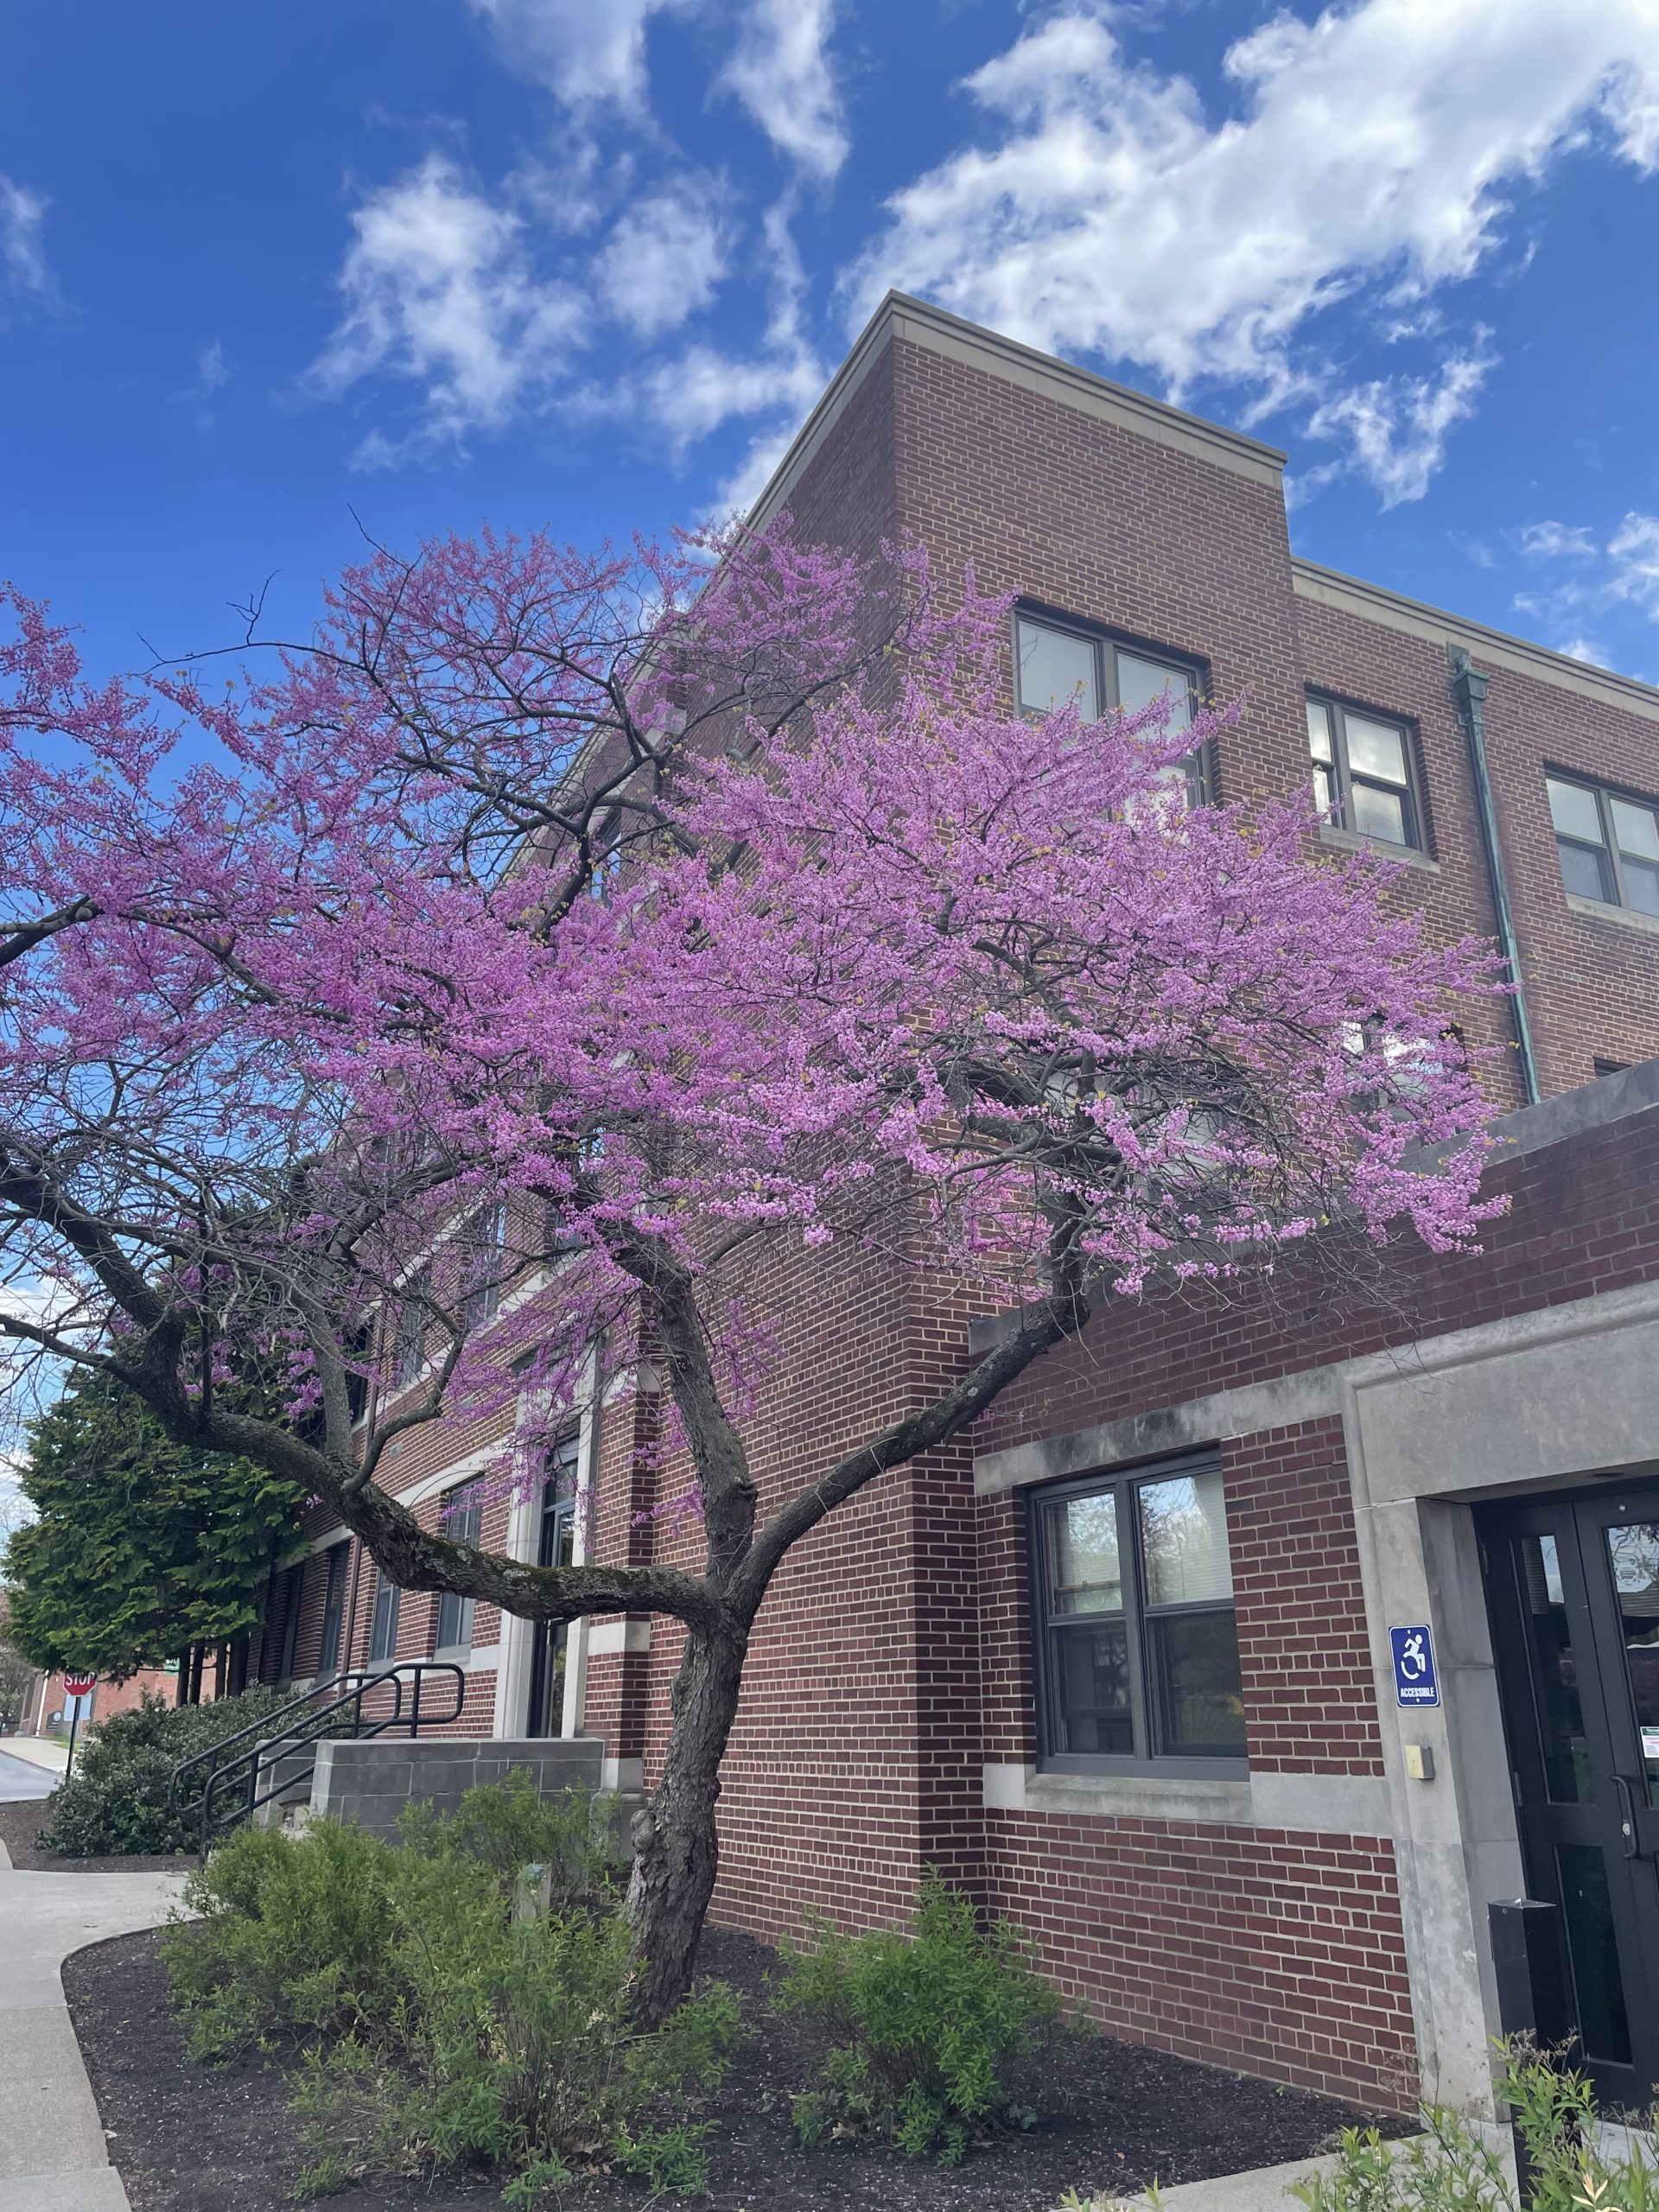 A gorgeous Eastern Redbud tree in bloom. Tree is tall, and has beautiful, small, purple flowers.